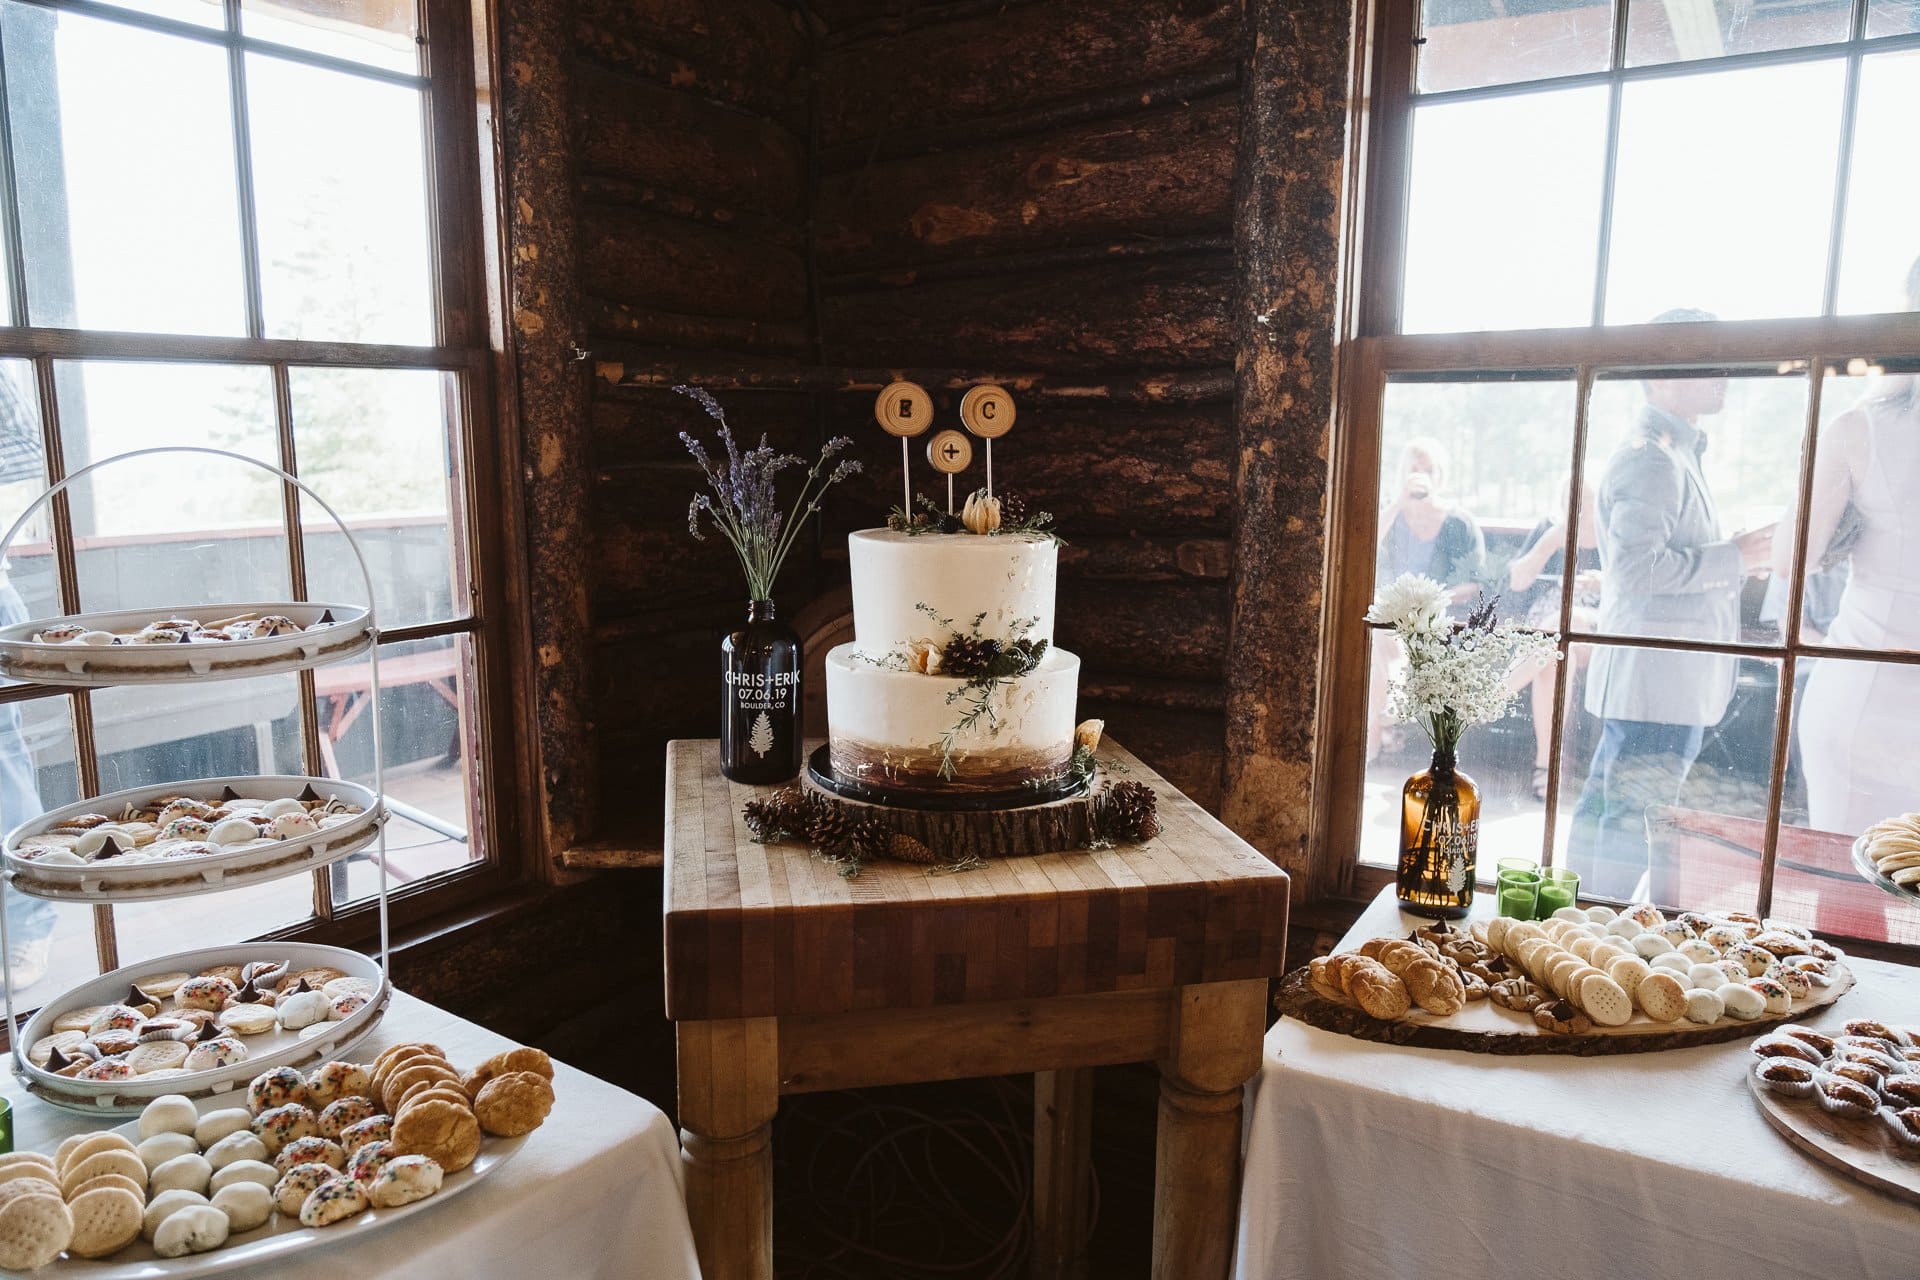 White and gold rustic wedding cake by Shamane's Bake Shoppe in Boulder Colorado